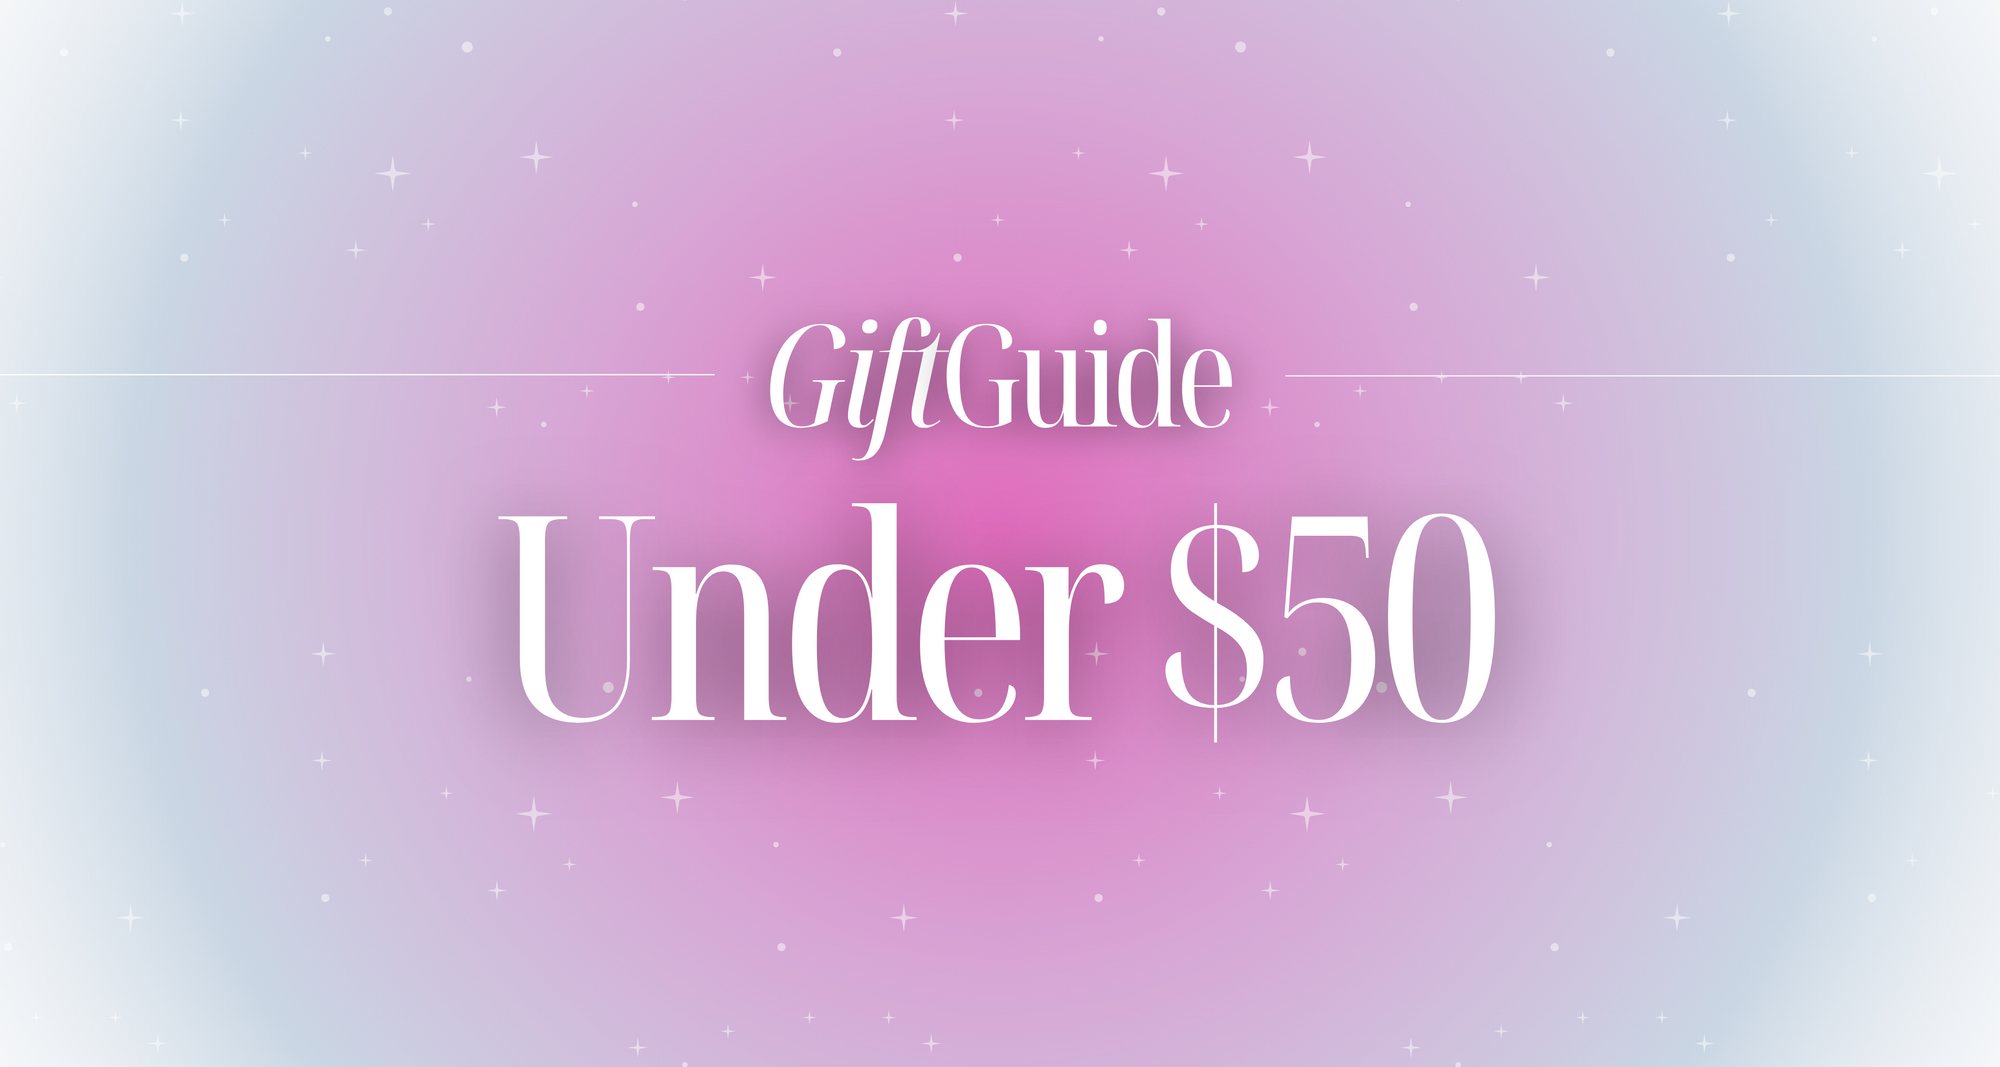 Gift Guide under $50